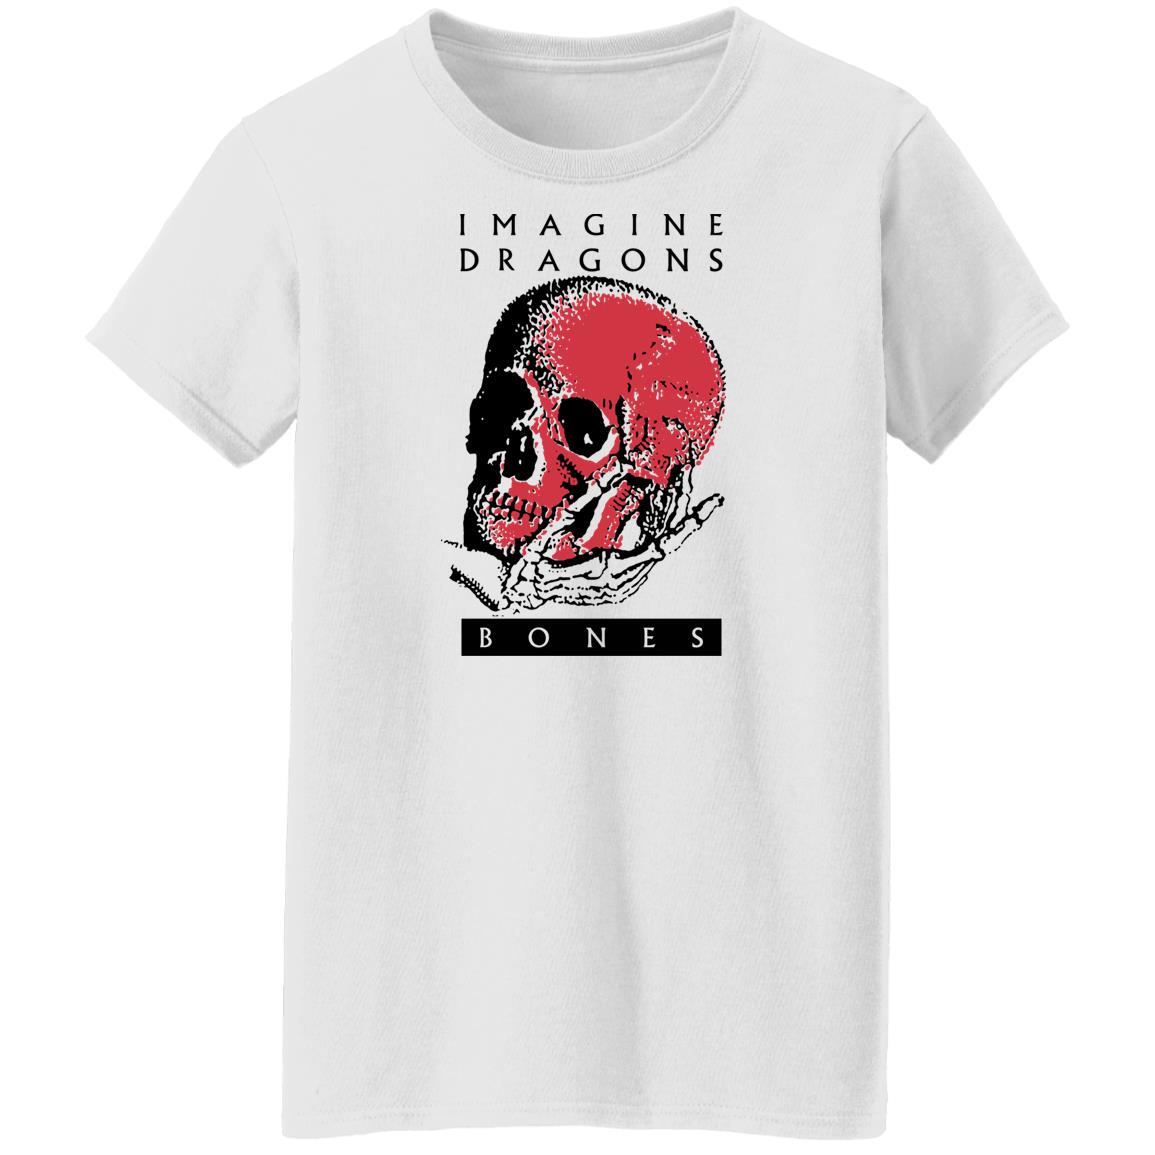 Rock Your Look with Imagine Dragons Official Merchandise